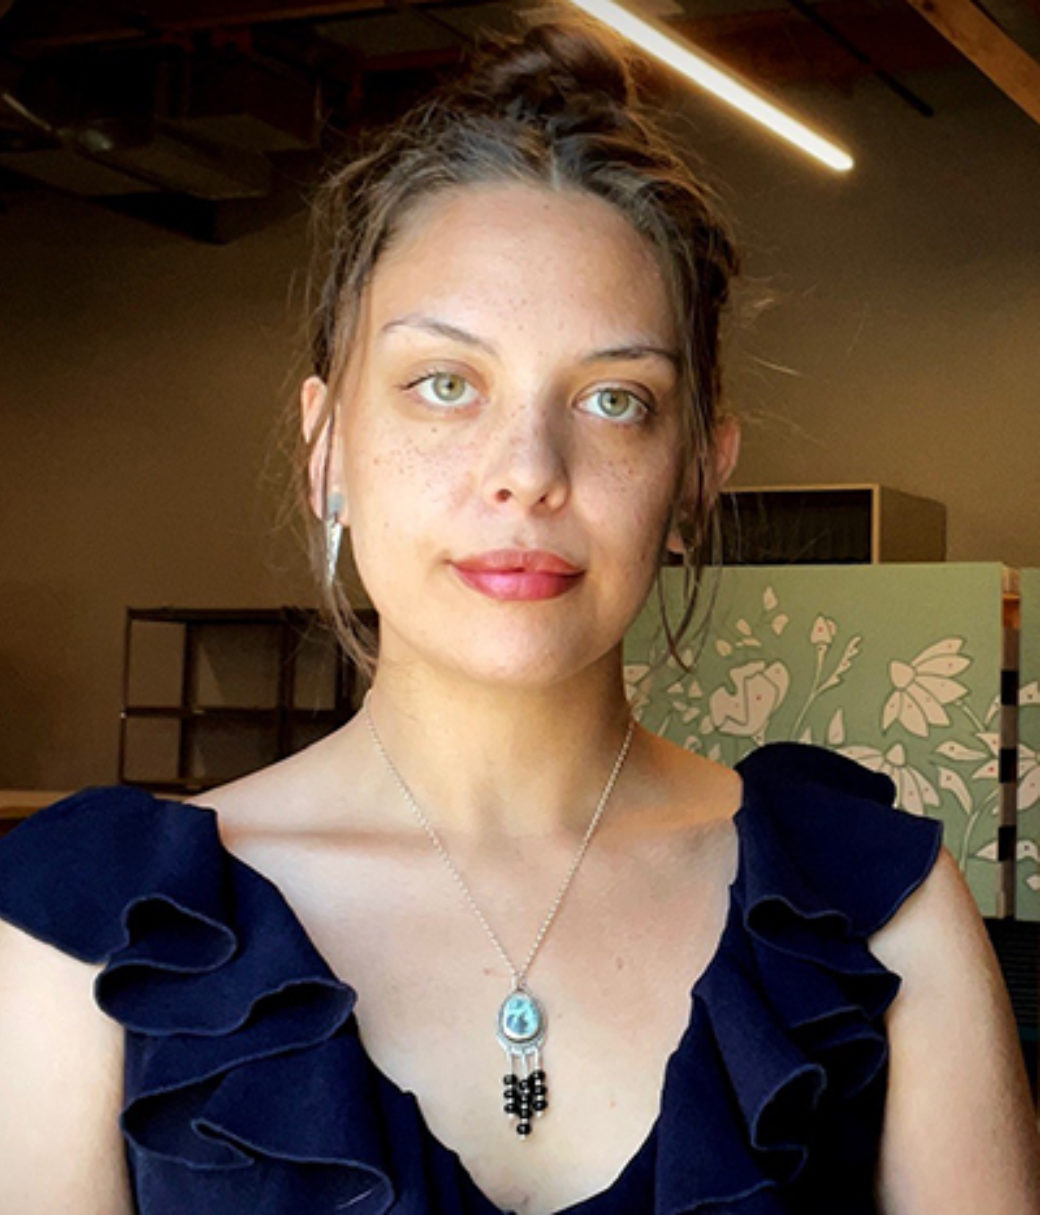 Woman wearing a dark blue shirt and a custom-made jewelry piece smirks at the camera